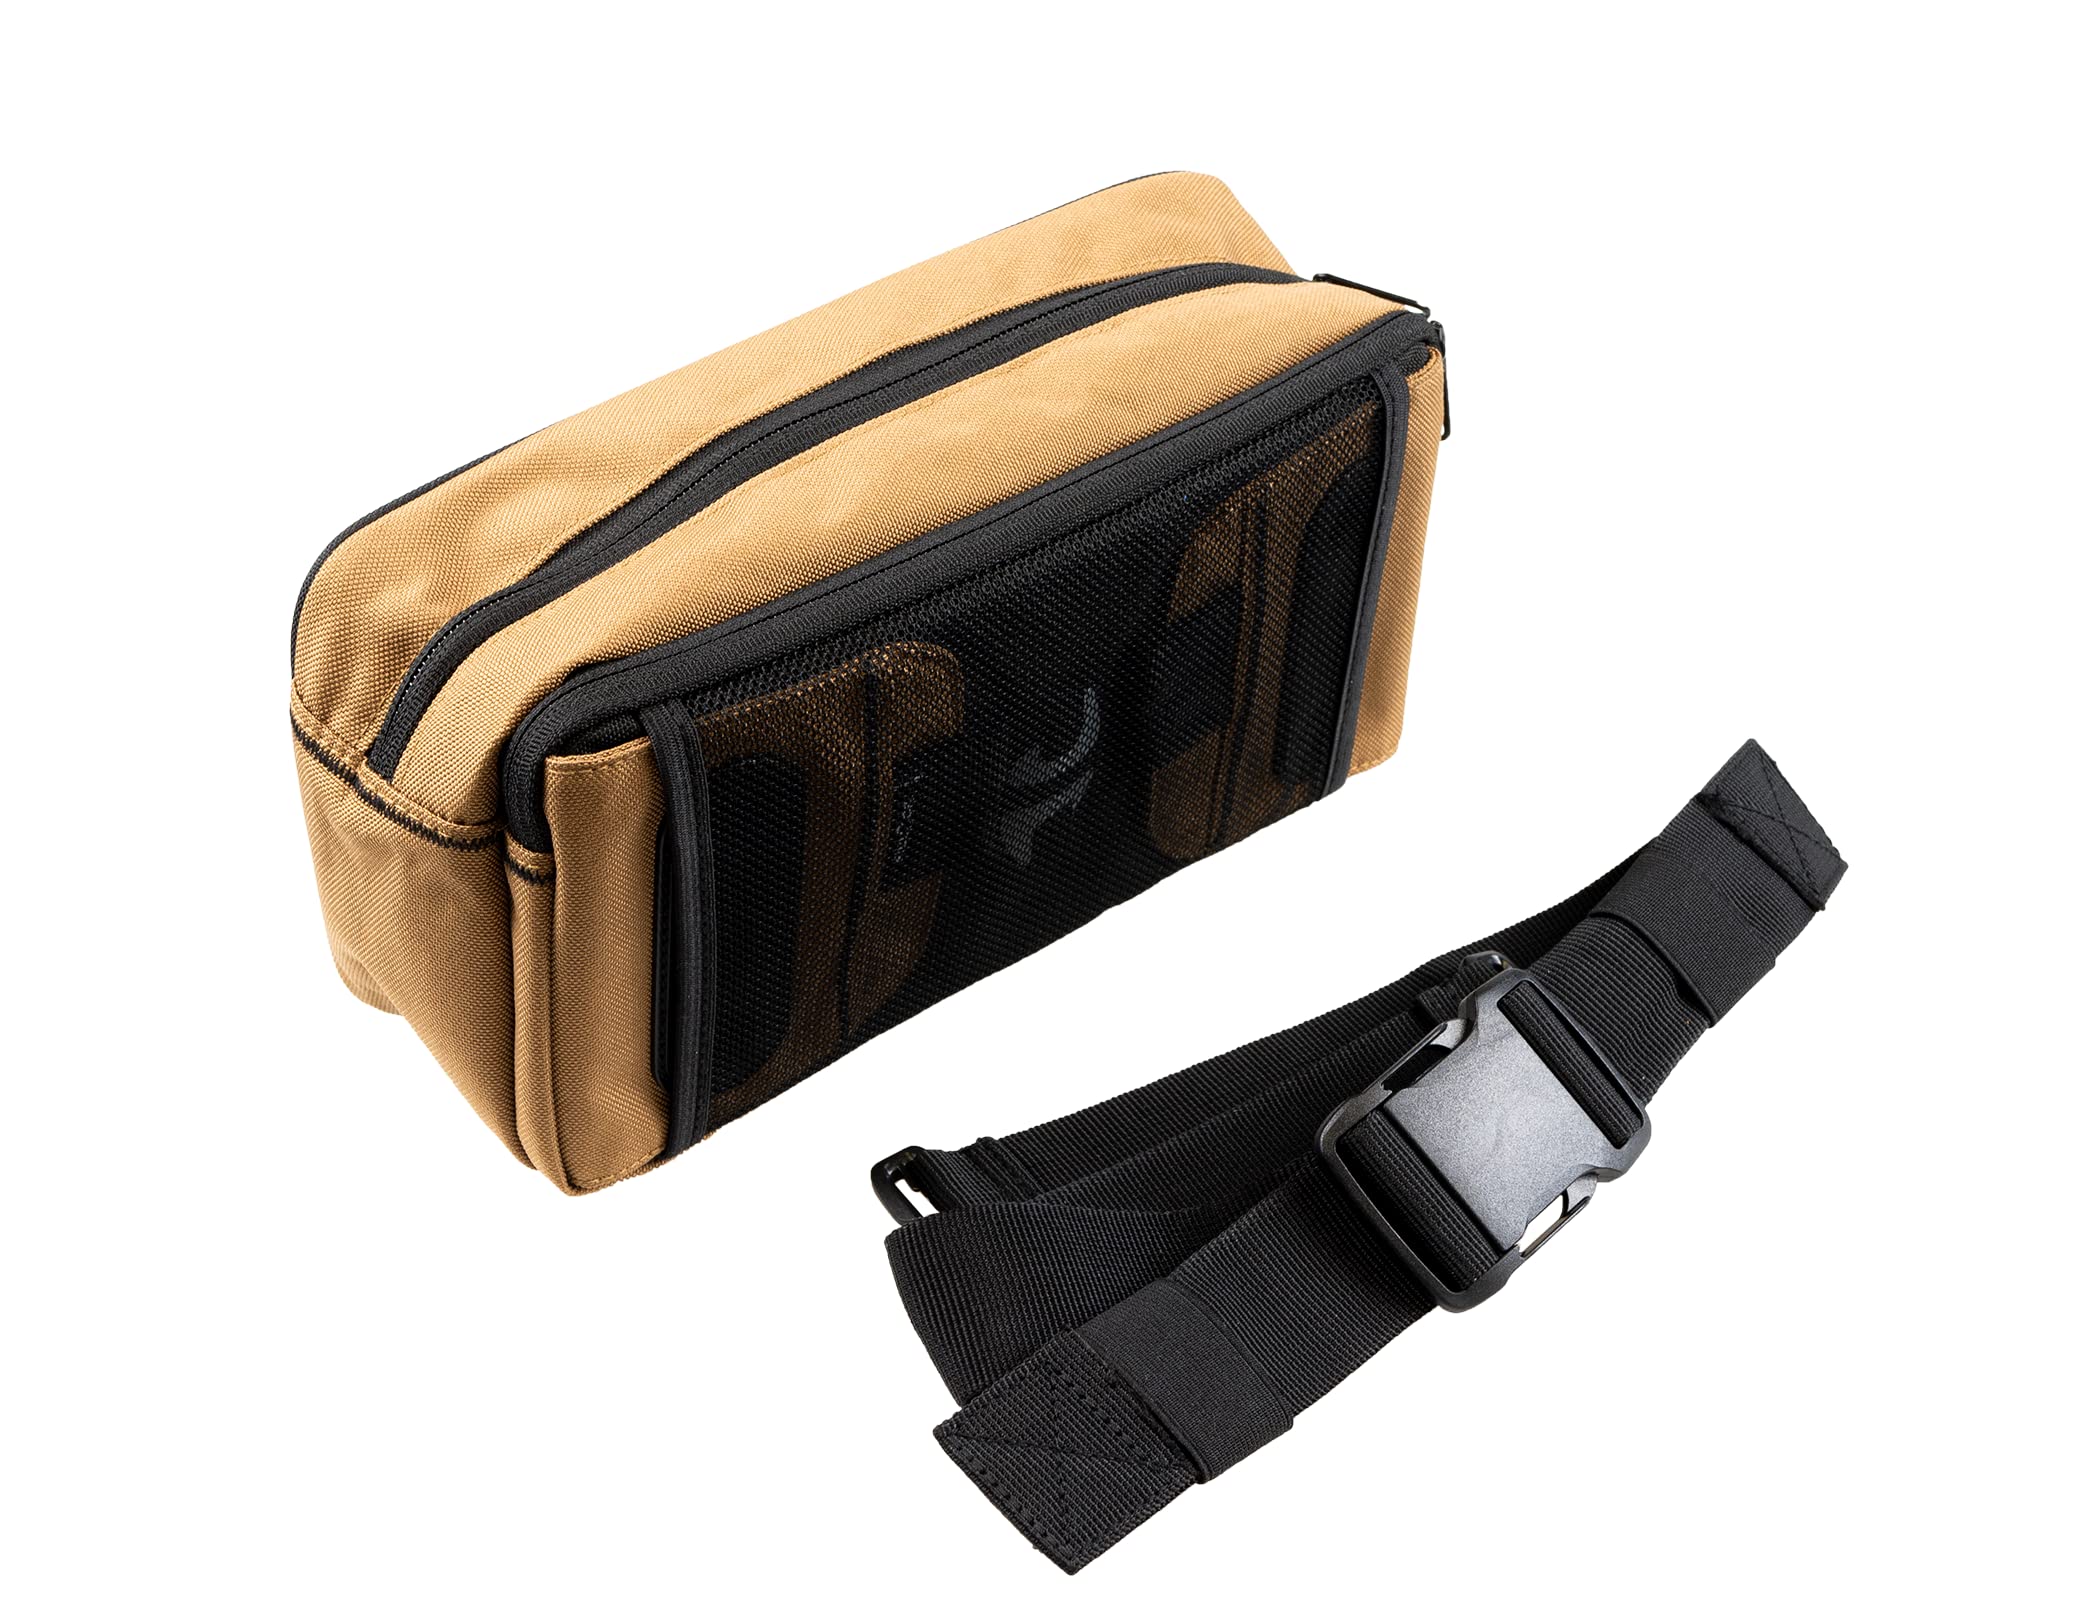 8TIMBER Unisex Black Reach Pack Belt Bag, Adjustable Waist Bag for Workouts, Running, Traveling, and Hiking Adventures - Fanny Pack for Women and